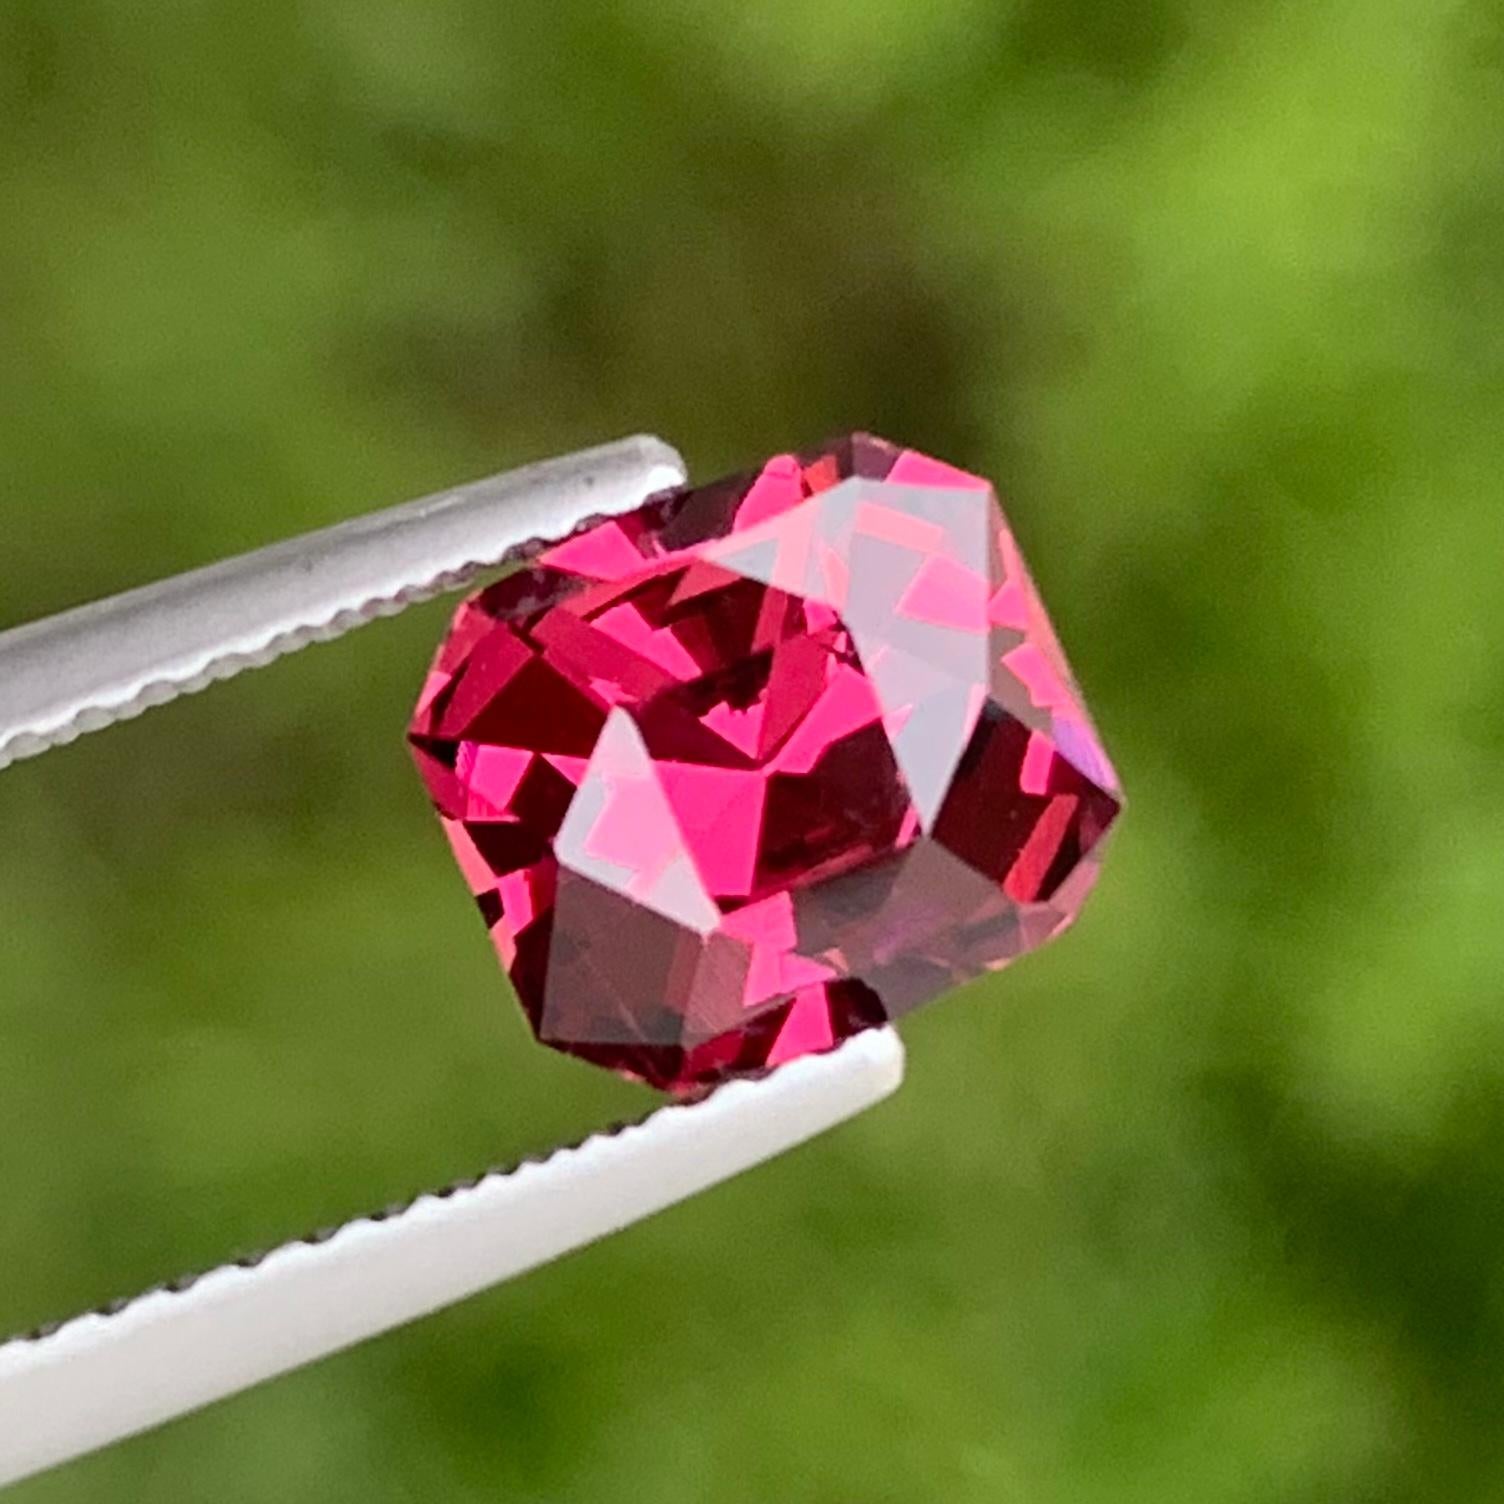 Loose Rhodolite Garnet
Weight : 2.30 Carats
Dimensions : 7.6x6.8x5 Mm
Origin : Tanzania Africa
Clarity : AAA Loupe Clean 
Shape: Emerald 
Cut: Fancy Bar Cut
Certificate: On Demand
Treatment: Non
Color: Purple Red
Rhodolite is a mixture of pyrope and